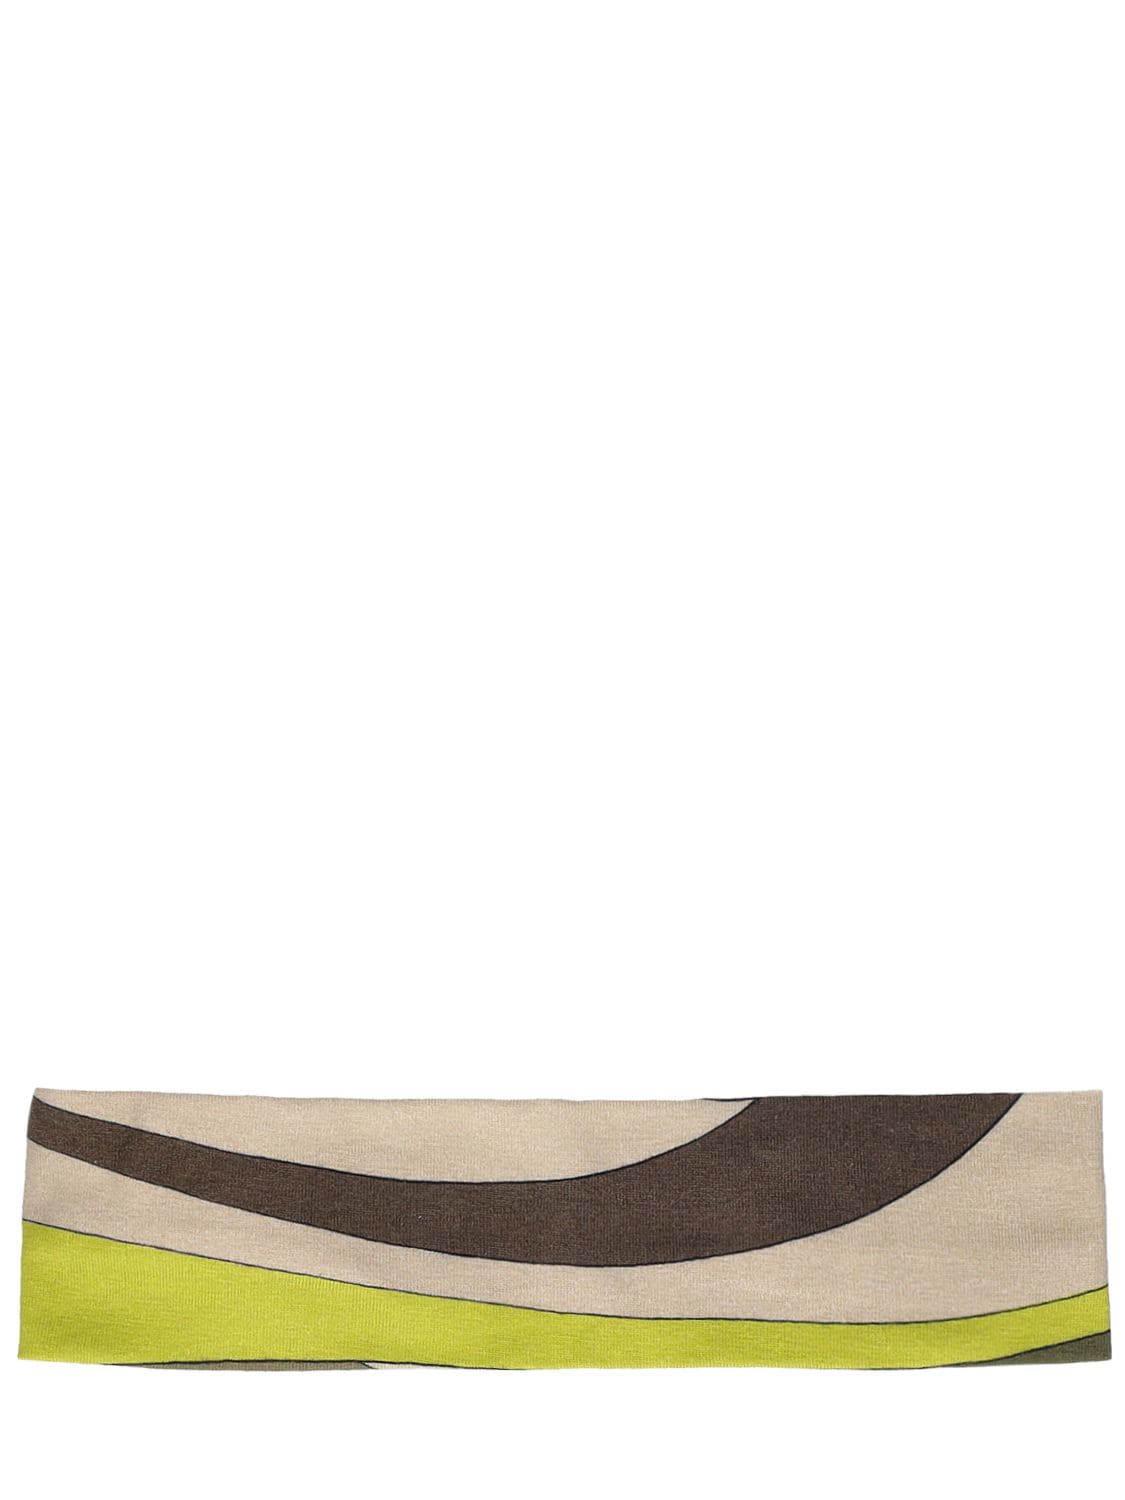 Pucci Kids' Printed Cotton Headband In Military Green